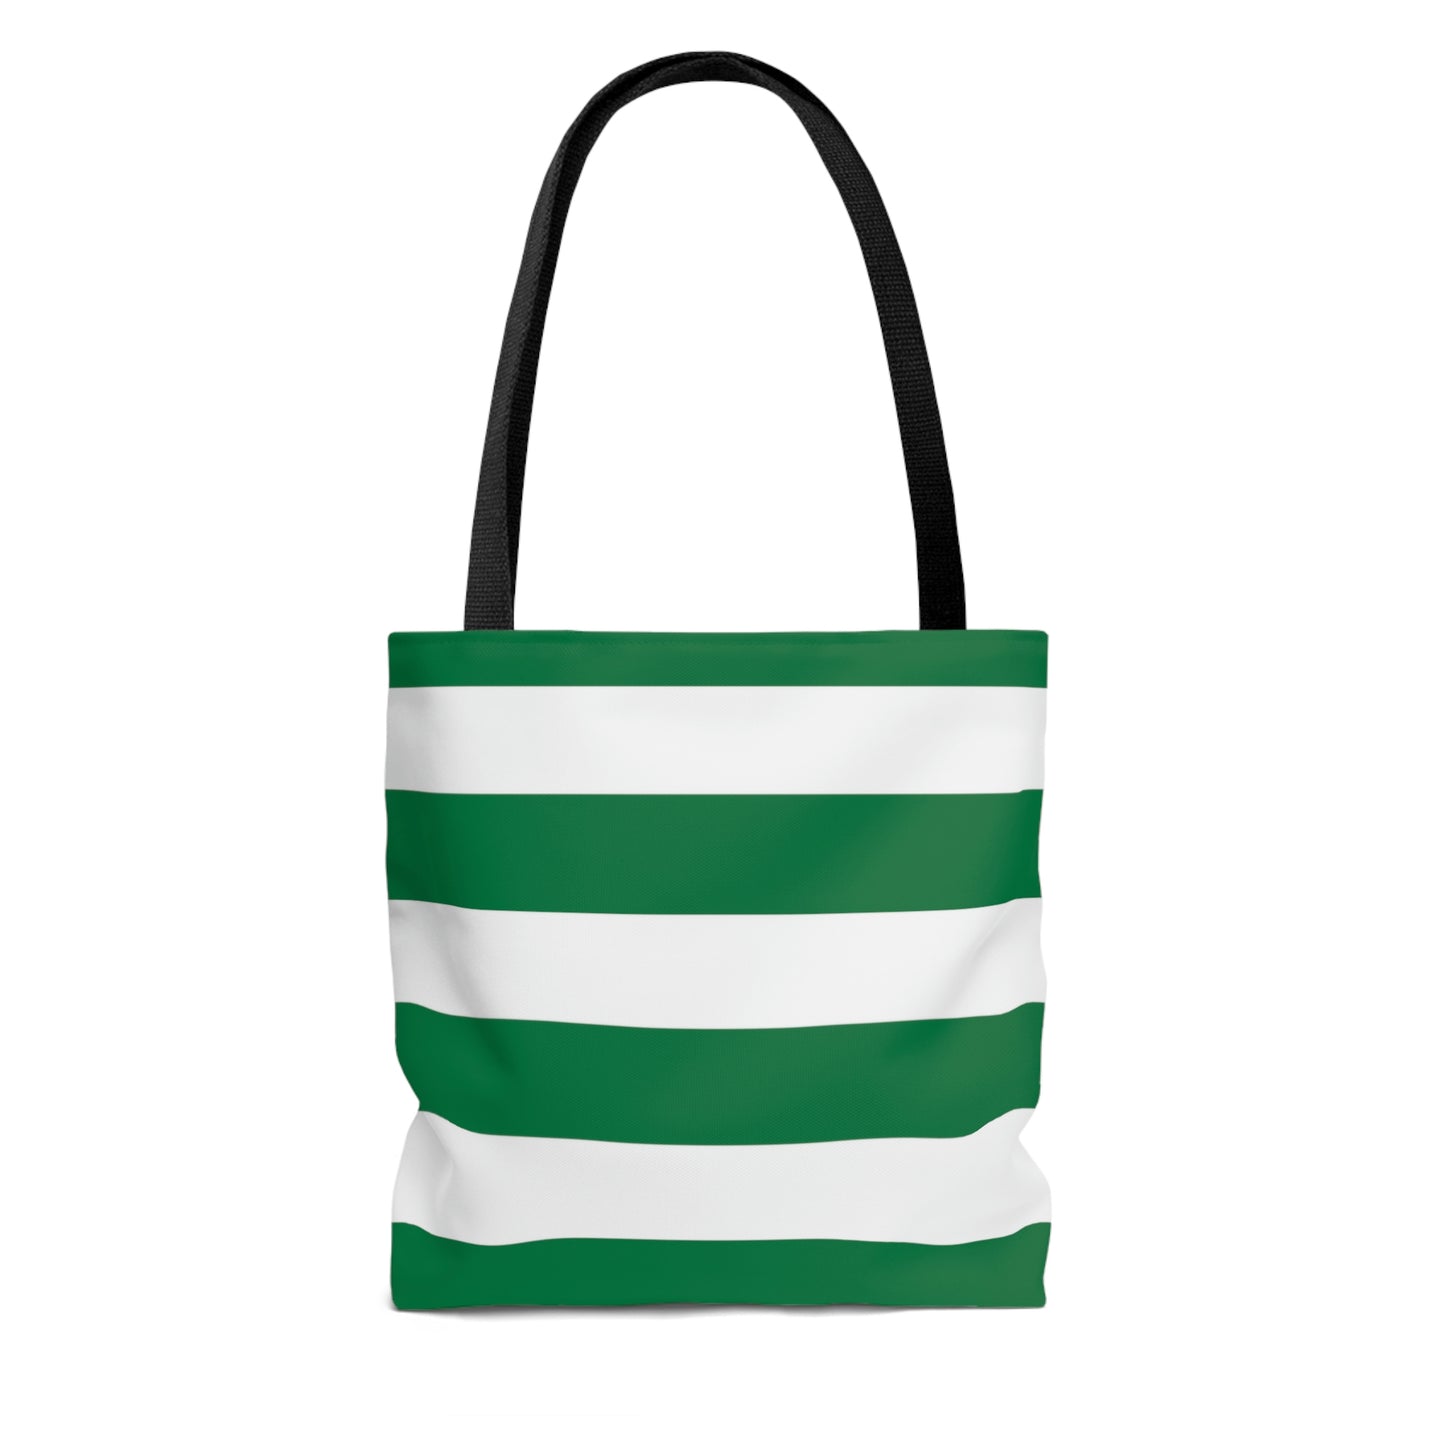 Lightweight Tote Bag - Kelly Green/White Stripes